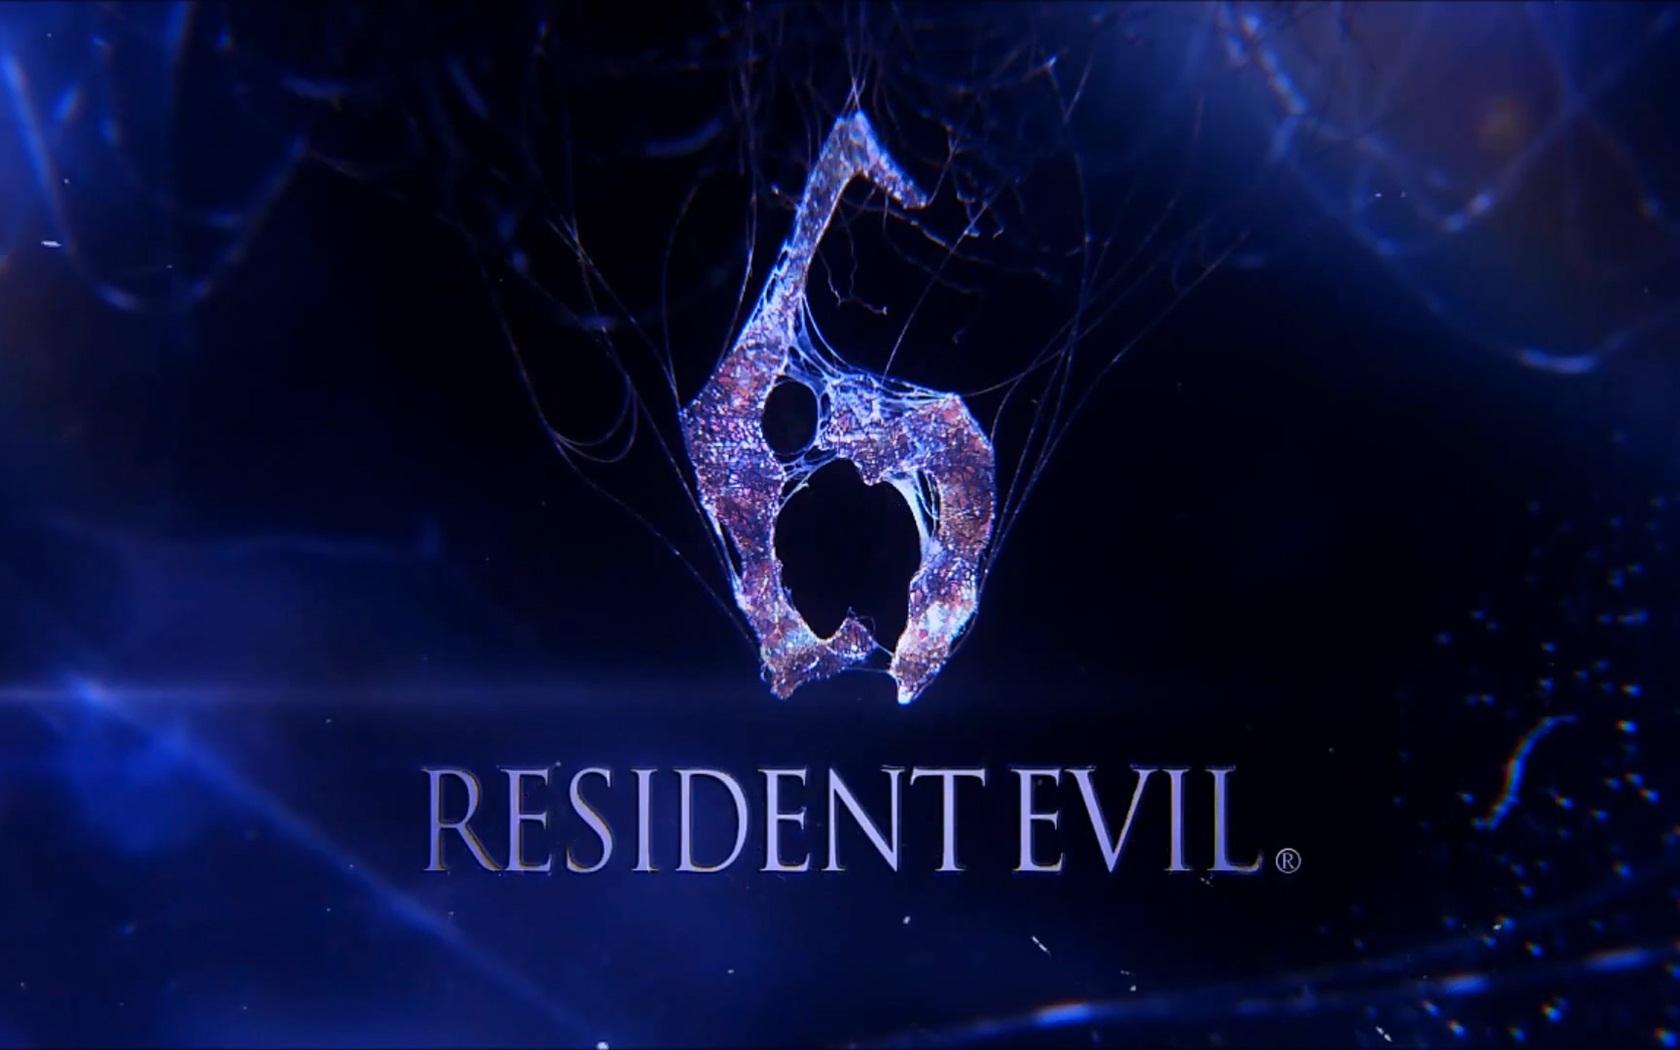 Resident Evil 6 HD game wallpapers #3 - 1680x1050